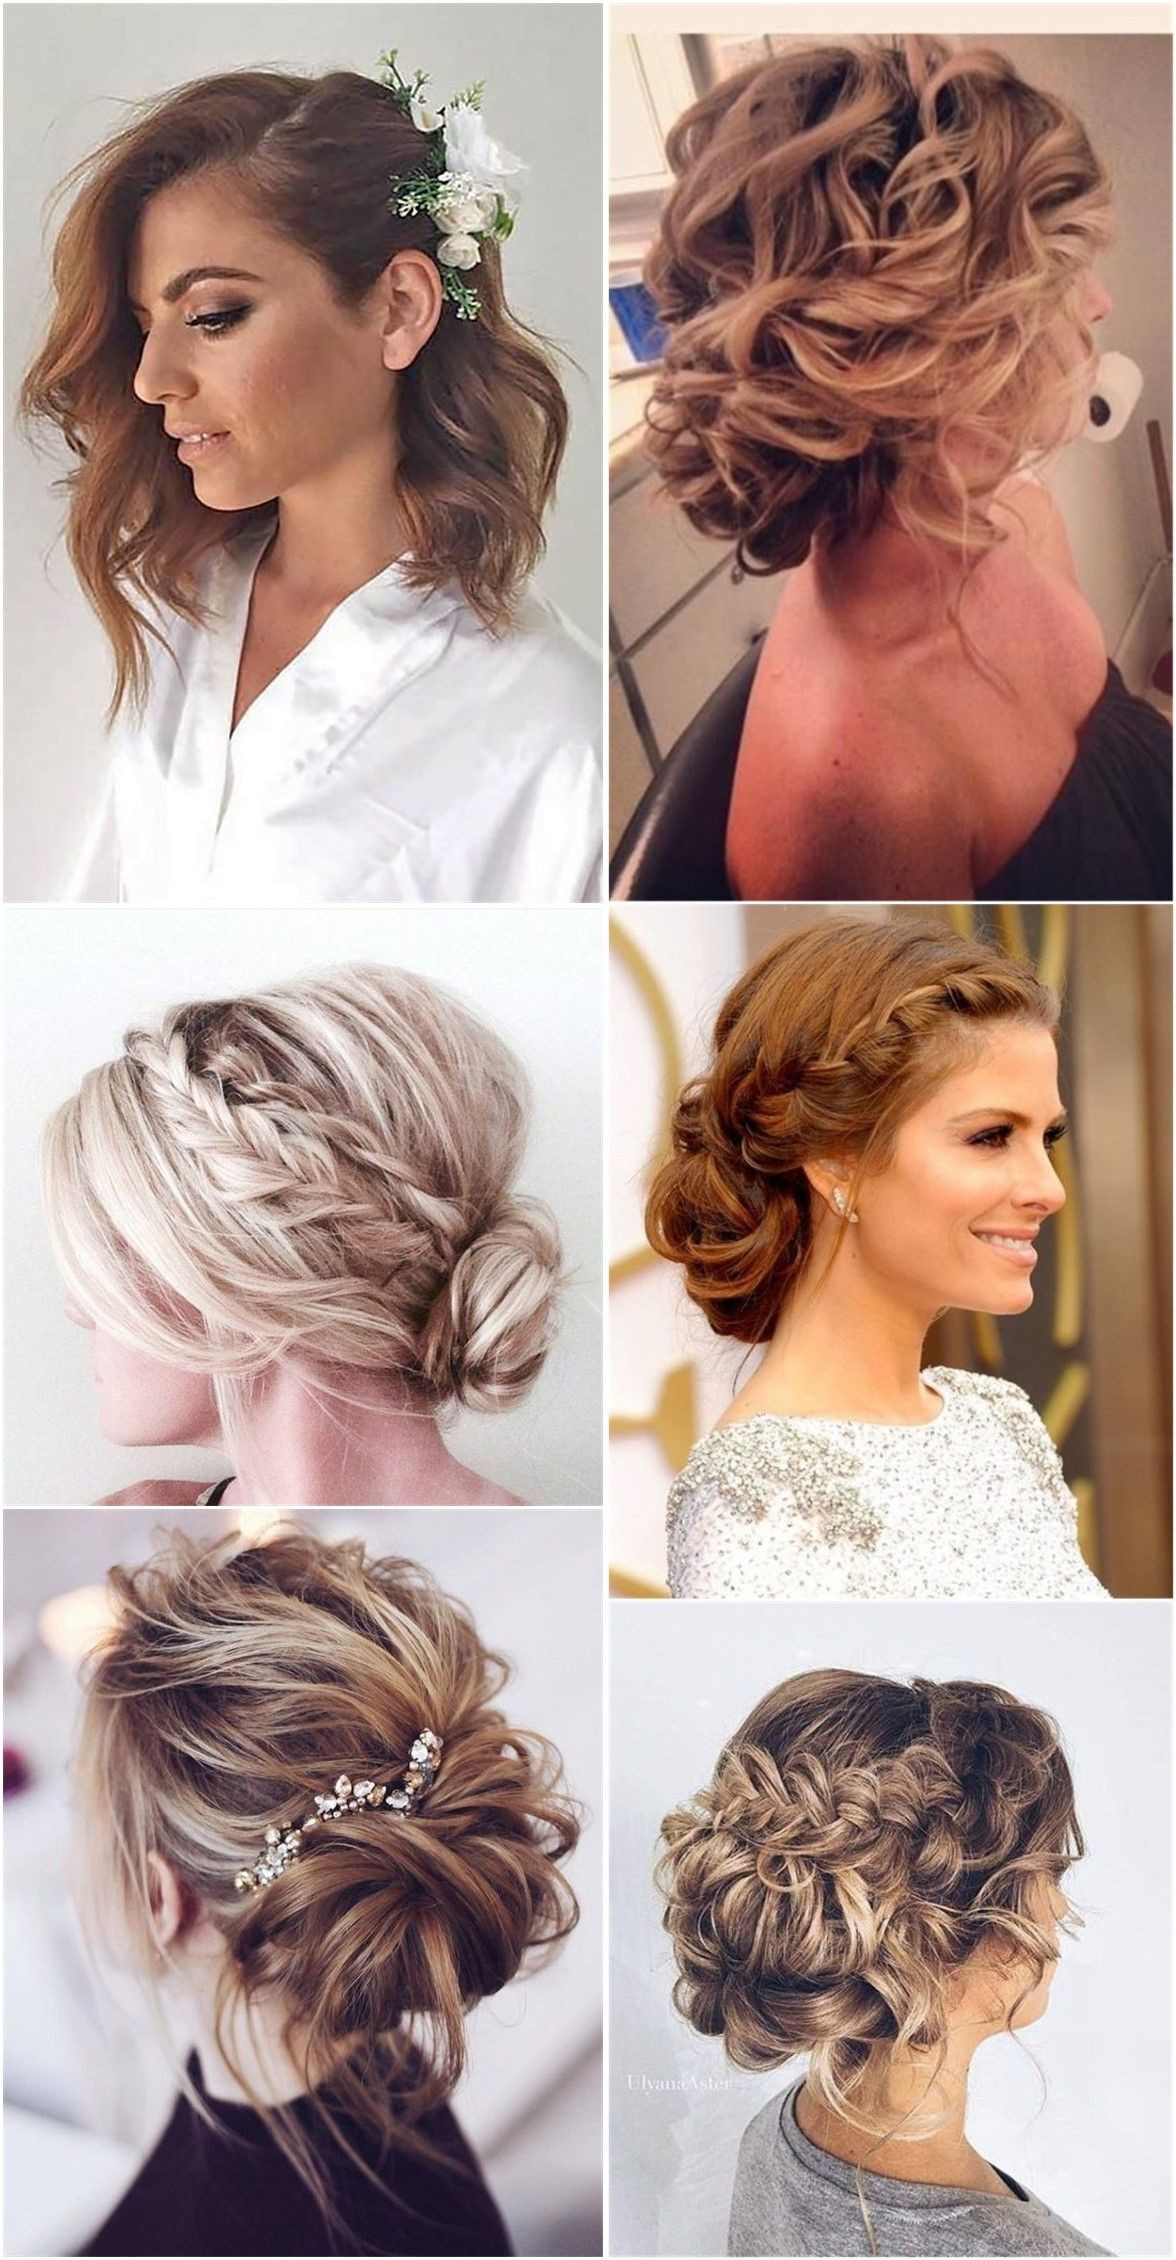 Shoulder Length Bridesmaid Hairstyles
 24 Lovely Medium length Hairstyles For 2020 Weddings con